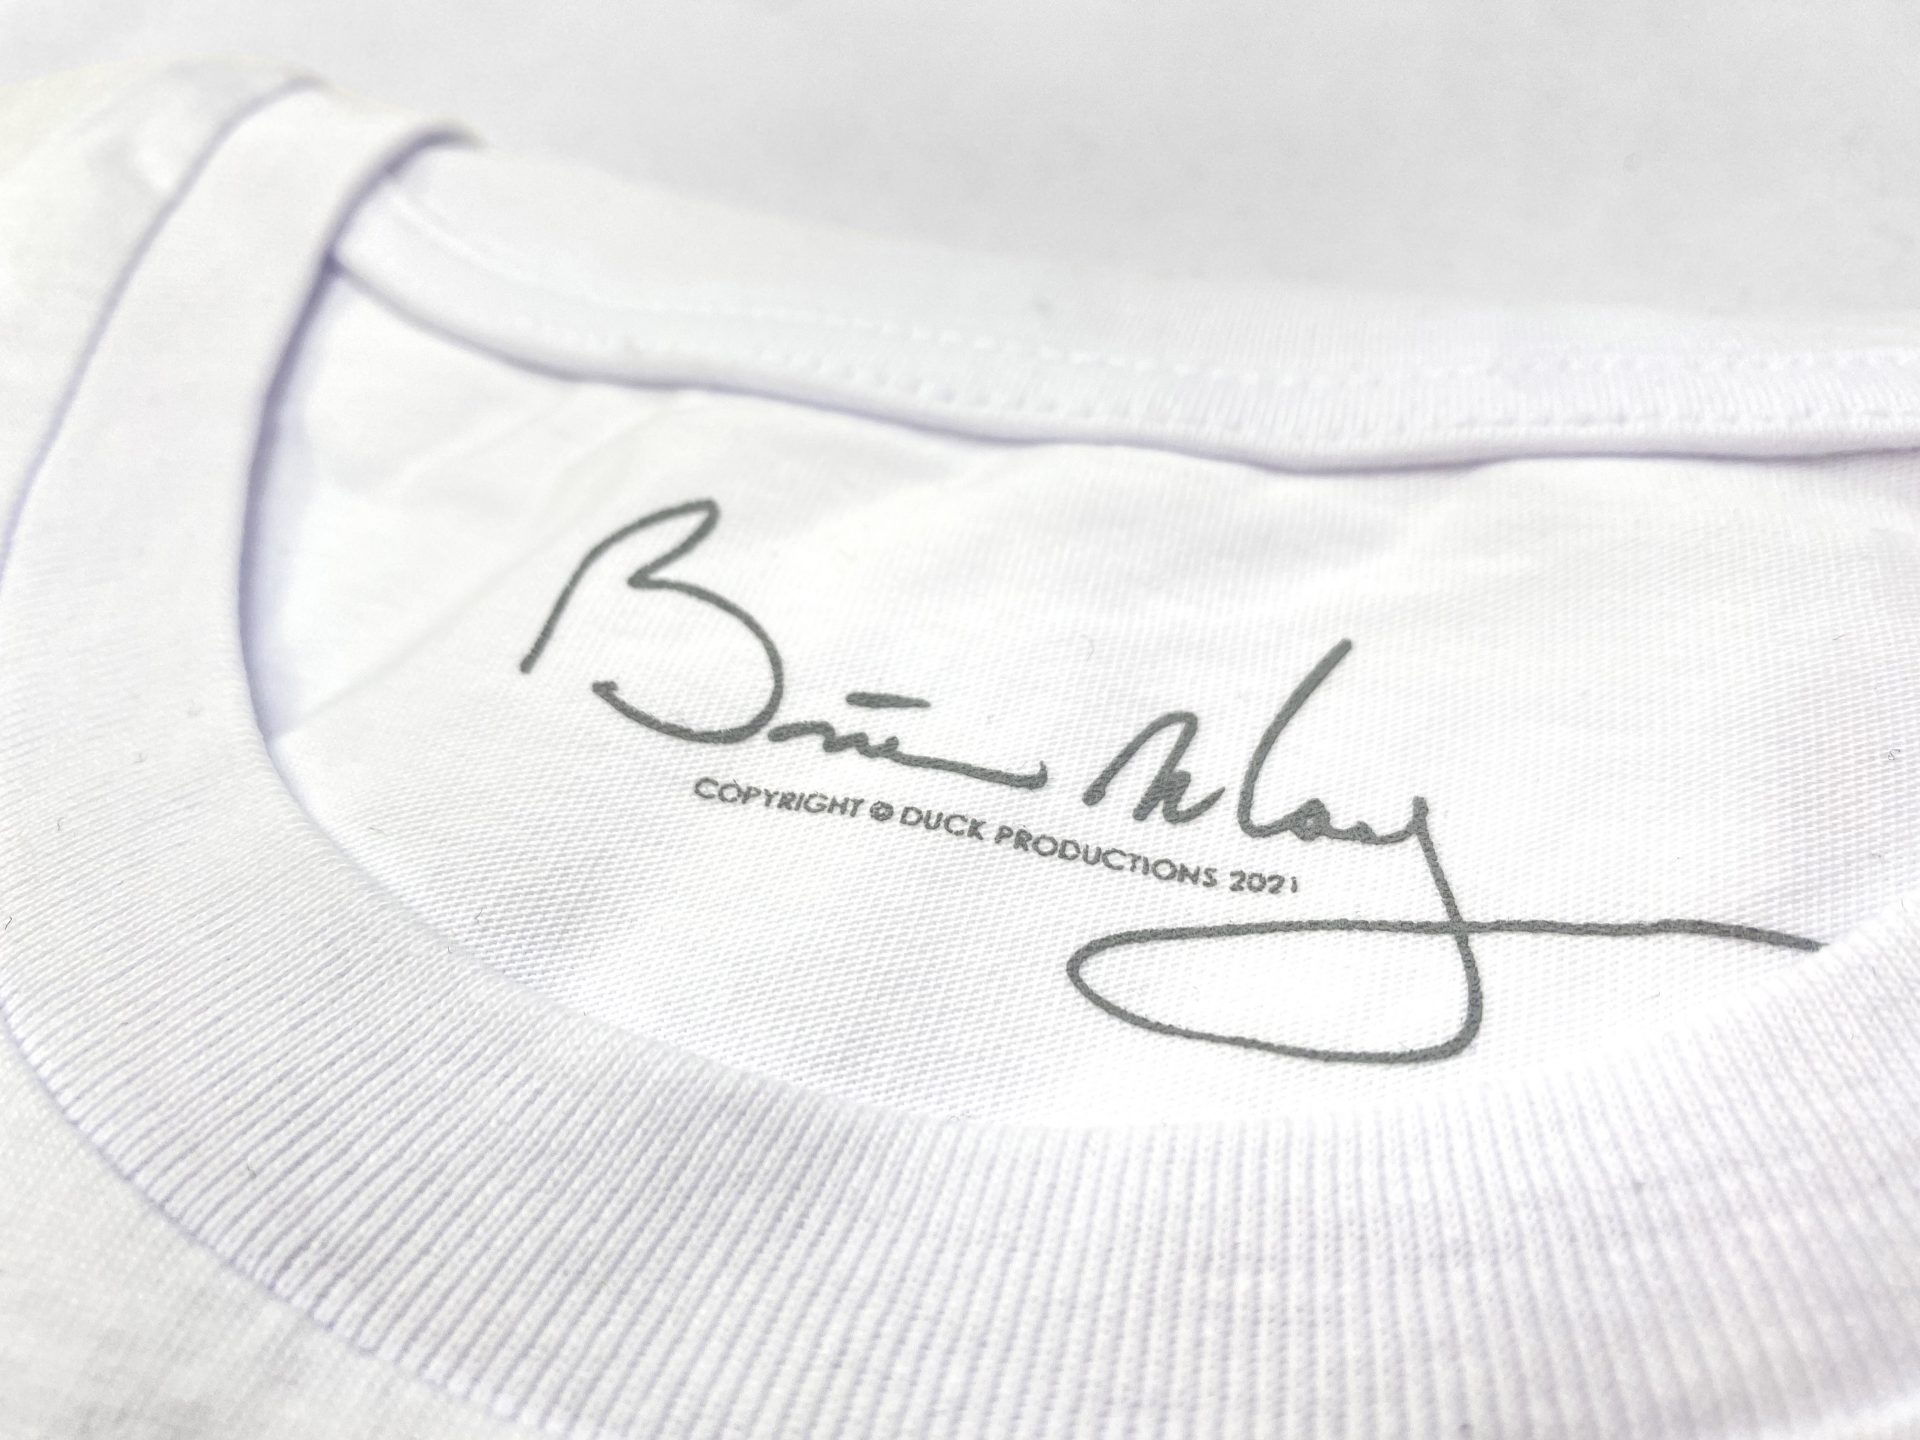 Neck print of Brian May's signiture on a printed t-shirt by Paul Bristow